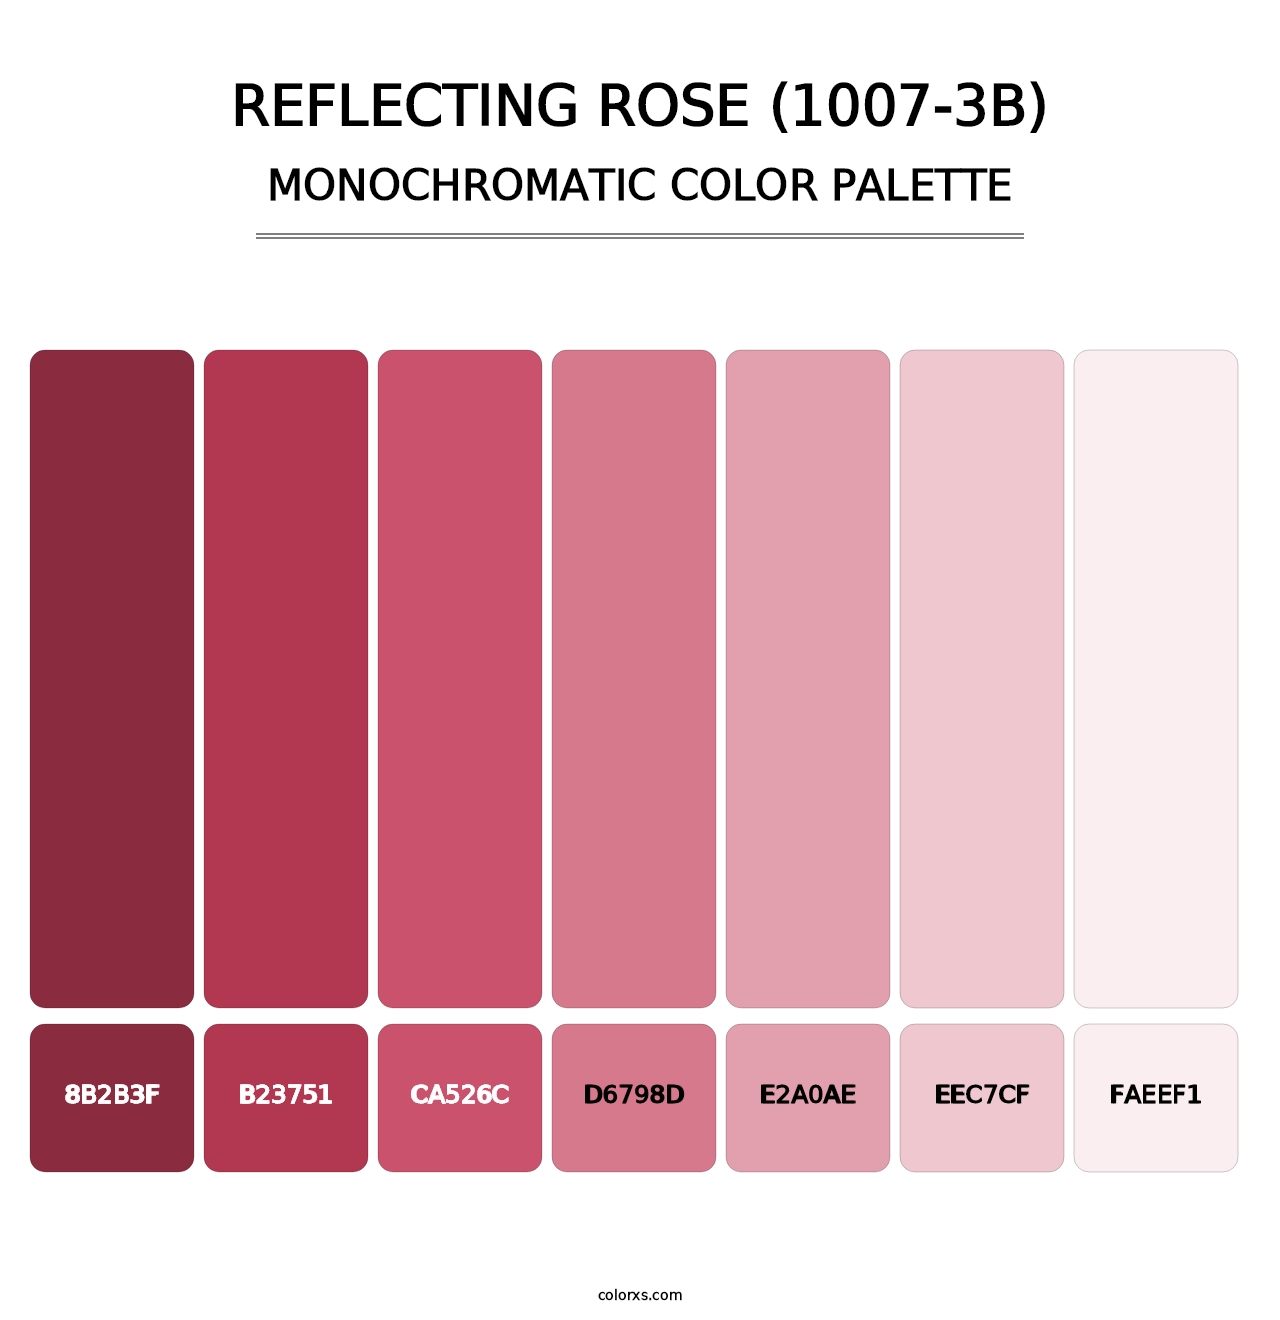 Reflecting Rose (1007-3B) - Monochromatic Color Palette